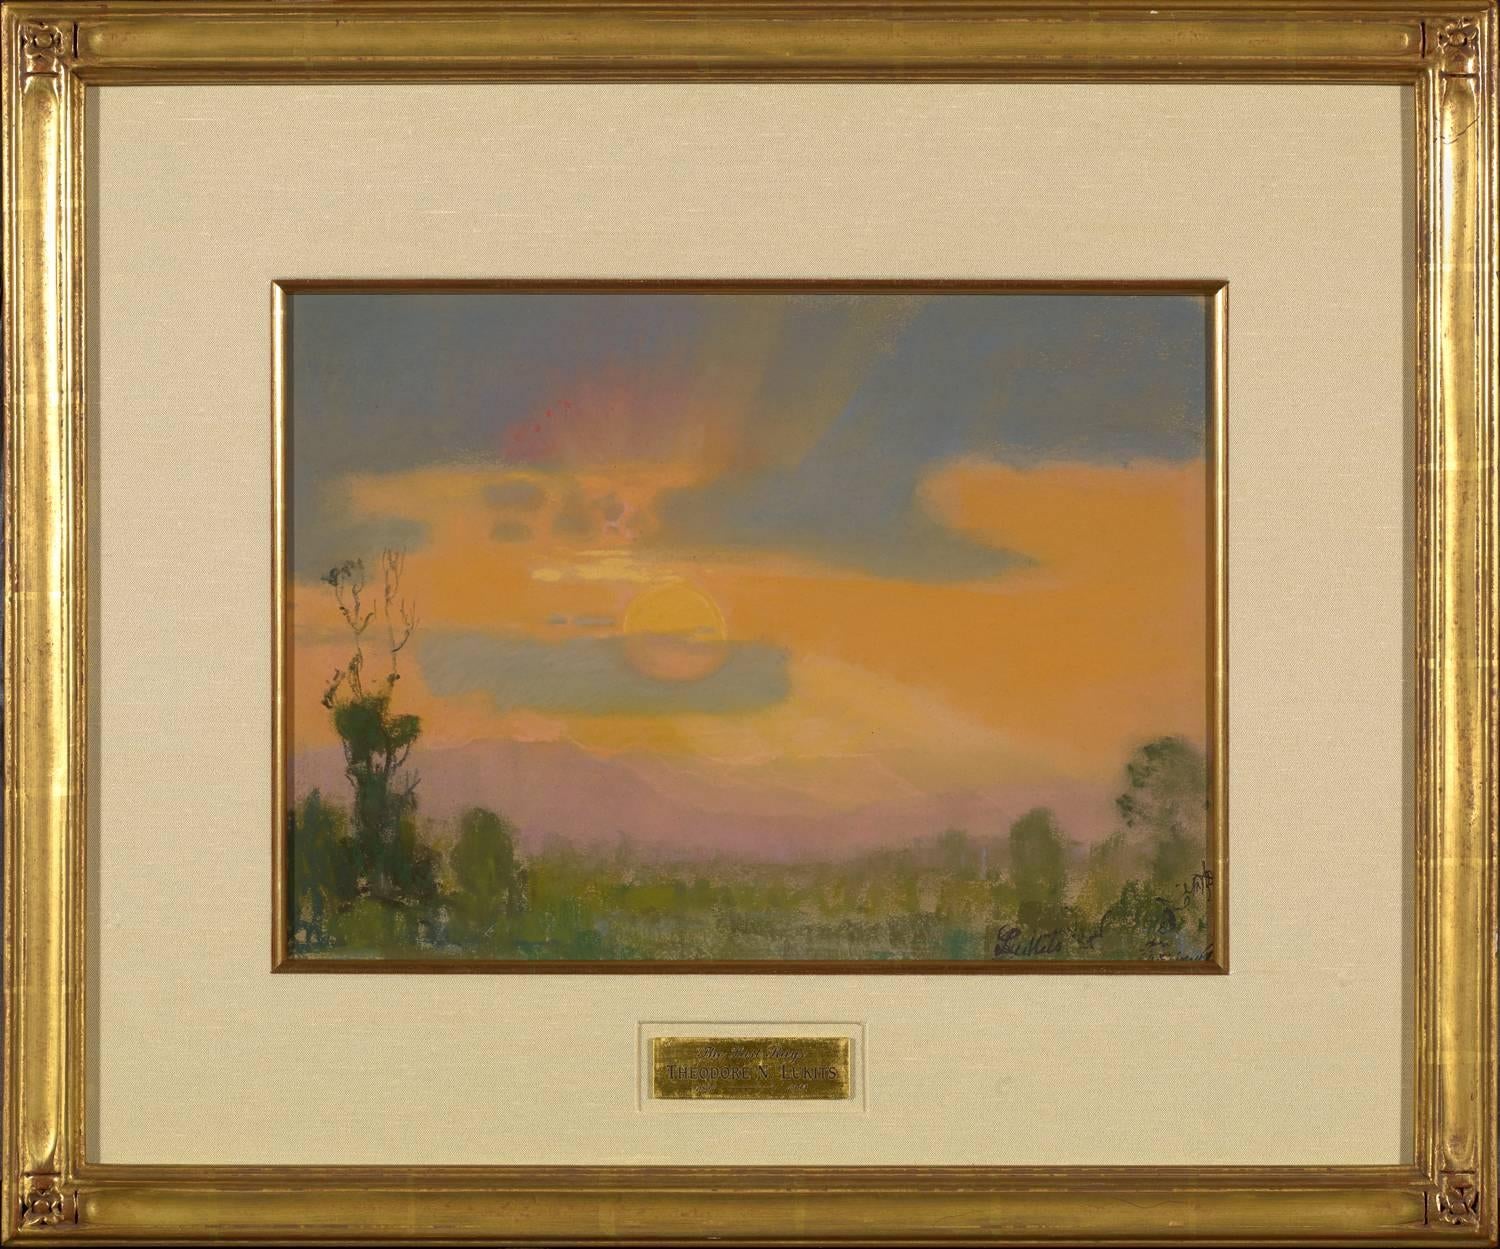 The Last Rays, c. 1924 - Painting by Theodore Lukits